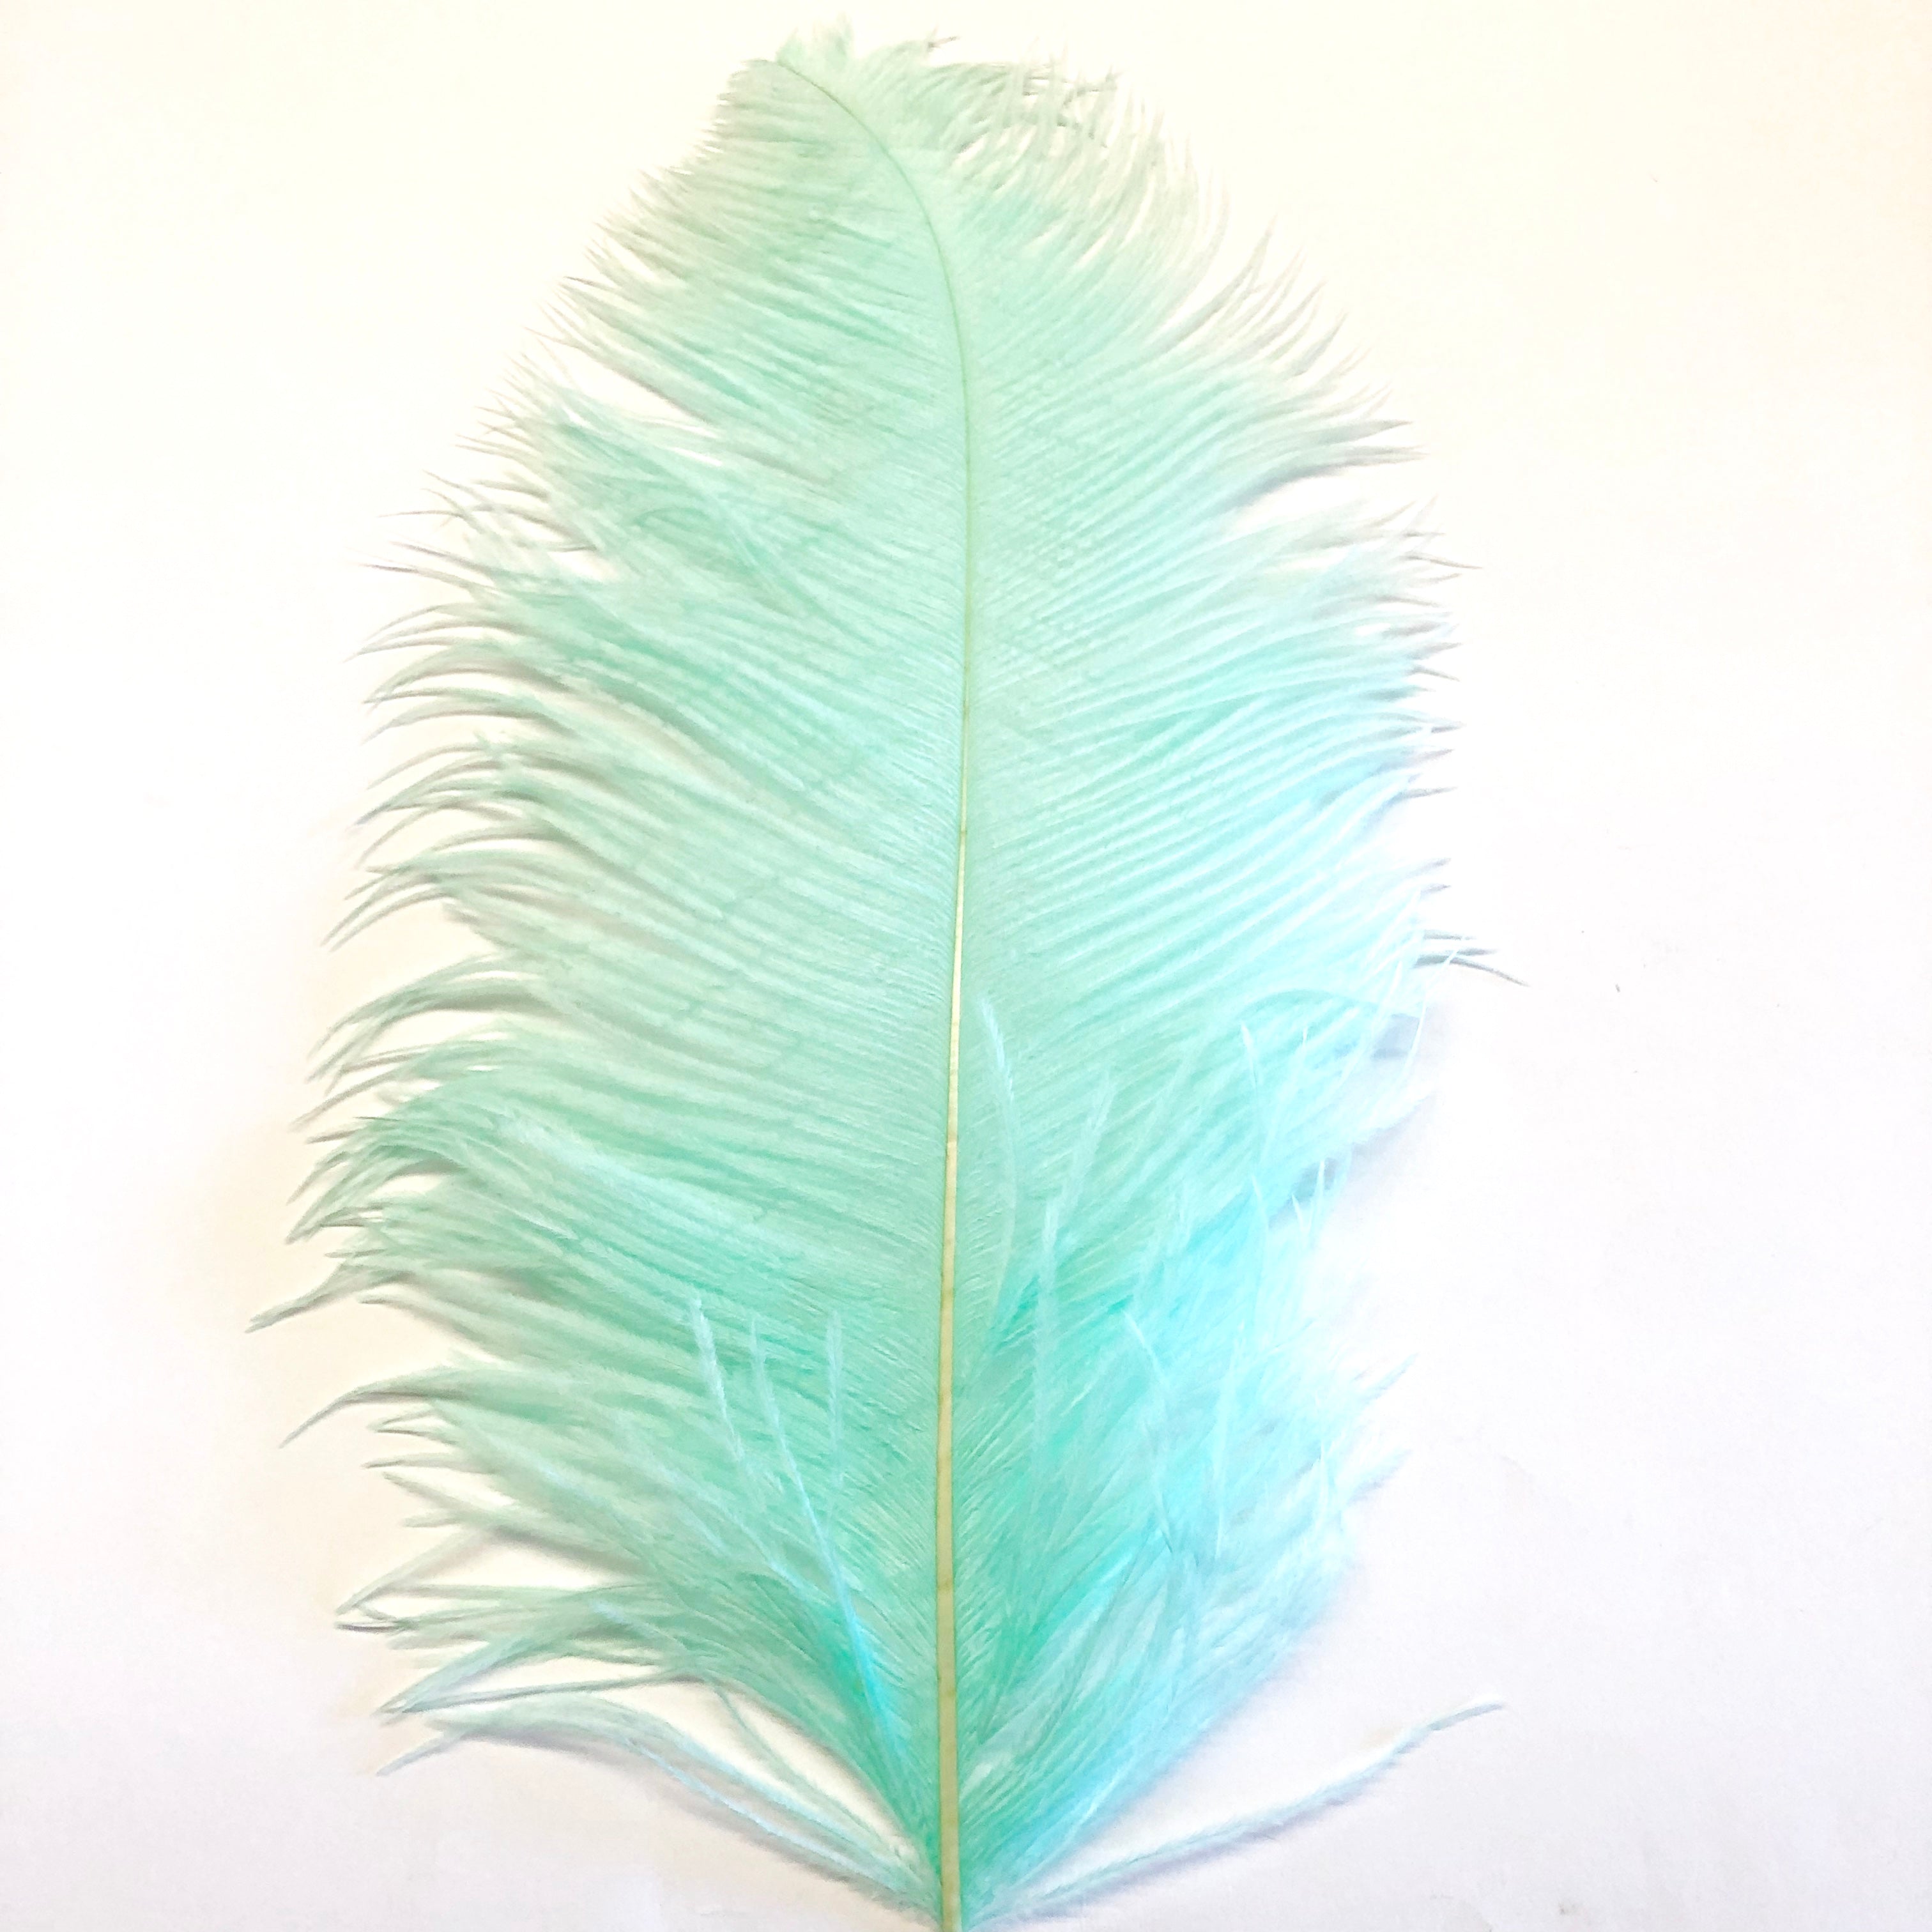 Ostrich Wing Feather Plumes 50-55cm (20-22") - Mint Green ((SECONDS))